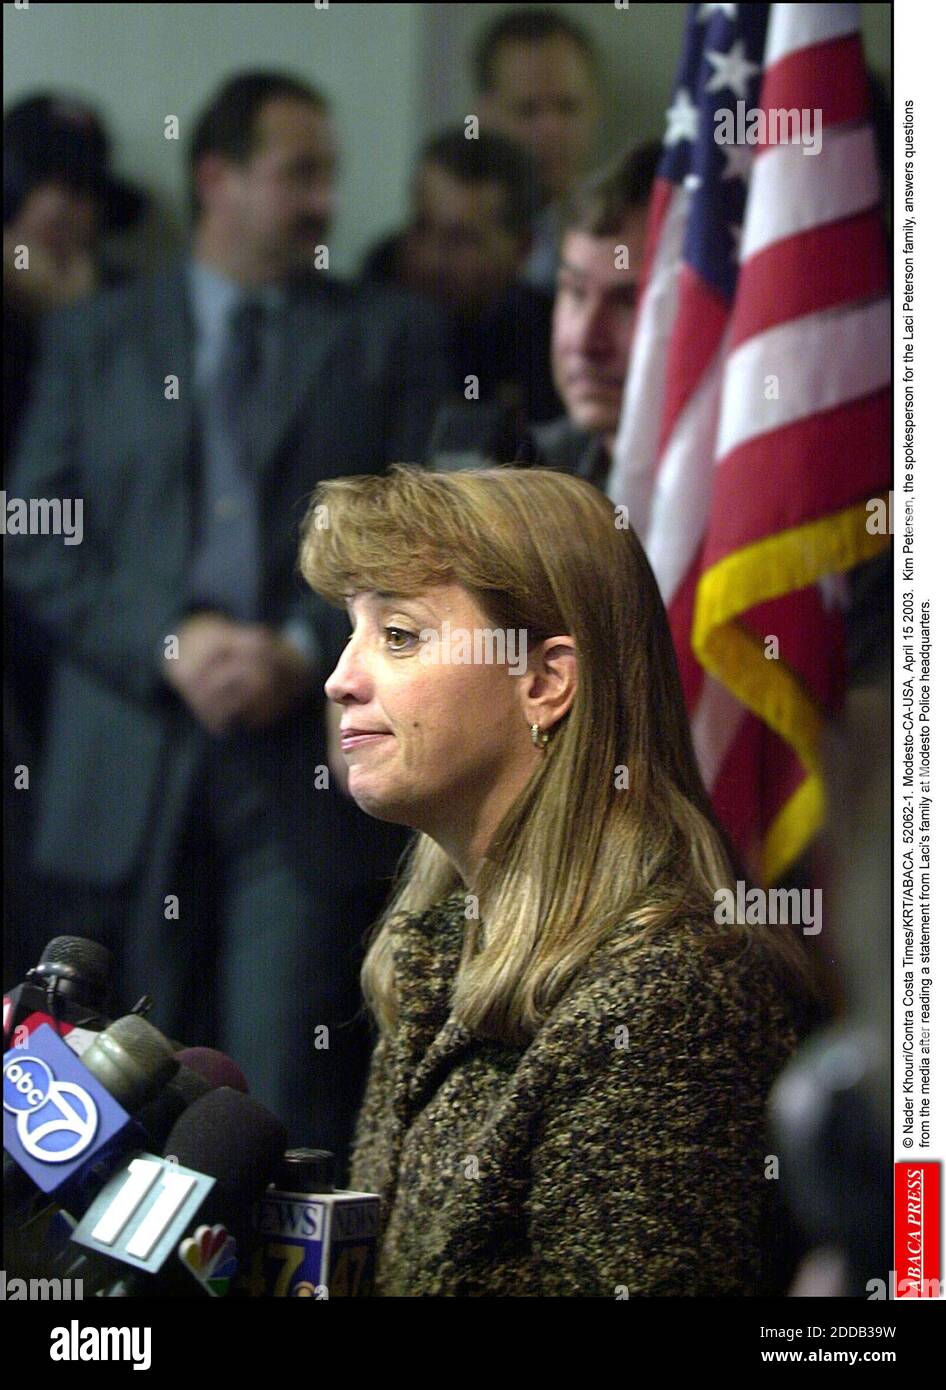 NO FILM, NO VIDEO, NO TV, NO DOCUMENTARY - © Nader Khouri/Contra Costa Times/KRT/ABACA. 52062-1. Modesto-CA-USA, April 15 2003. Kim Petersen, the spokesperson for the Laci Peterson family, answers questions from the media after reading a statement from Laci's family at Modesto Police headquarters. Stock Photo